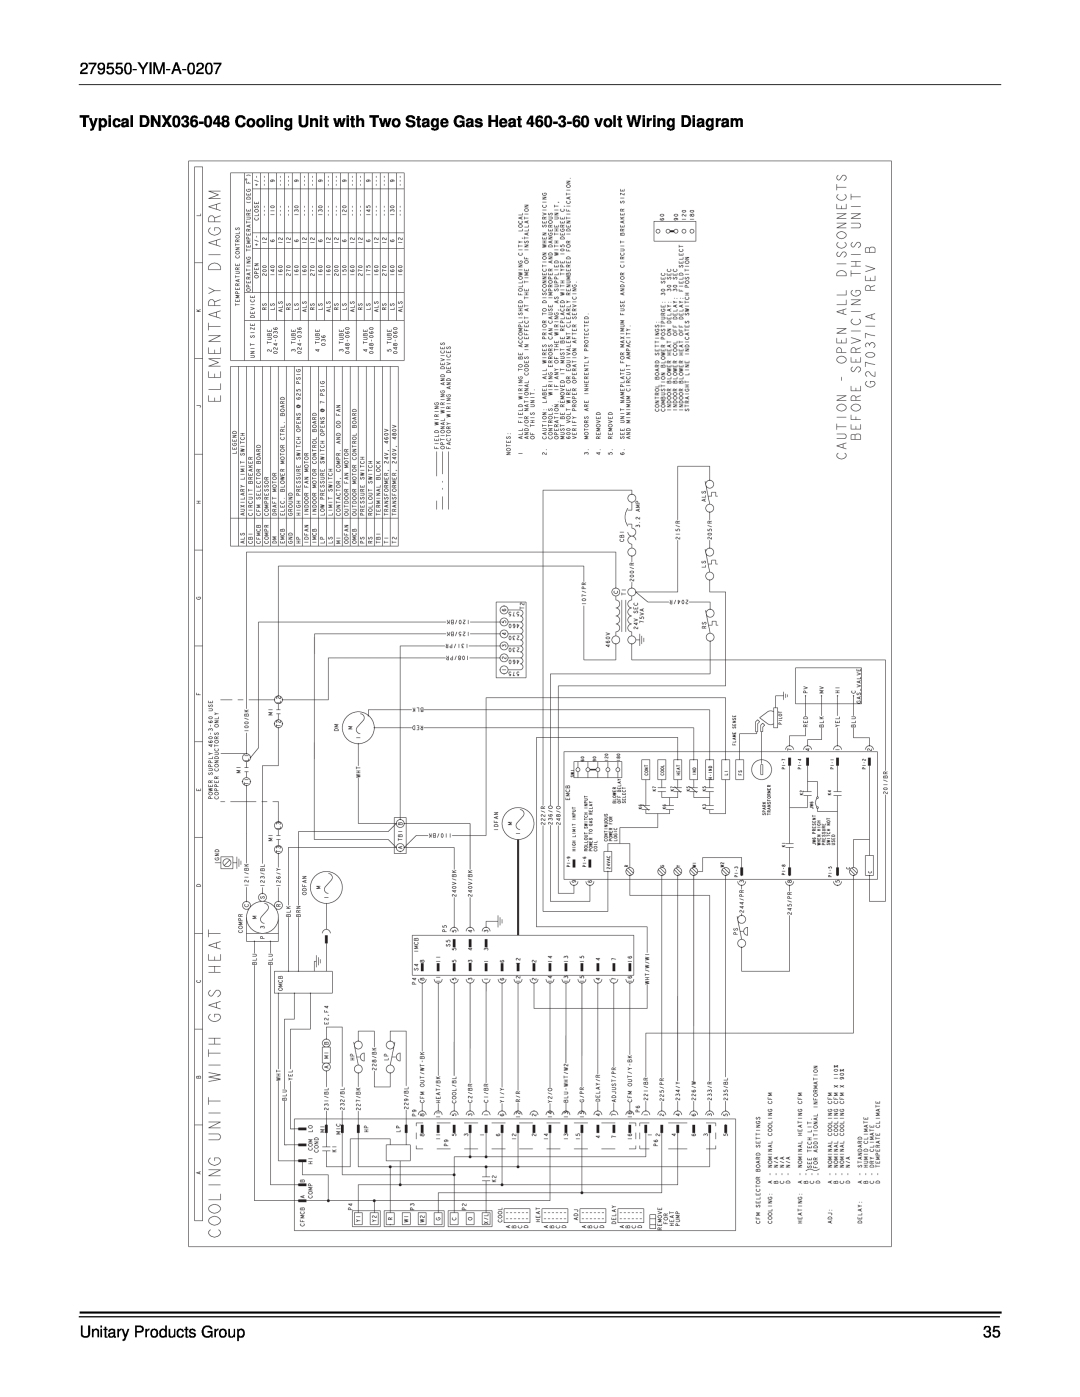 York R-410A dimensions YIM-A-0207, Unitary Products Group 